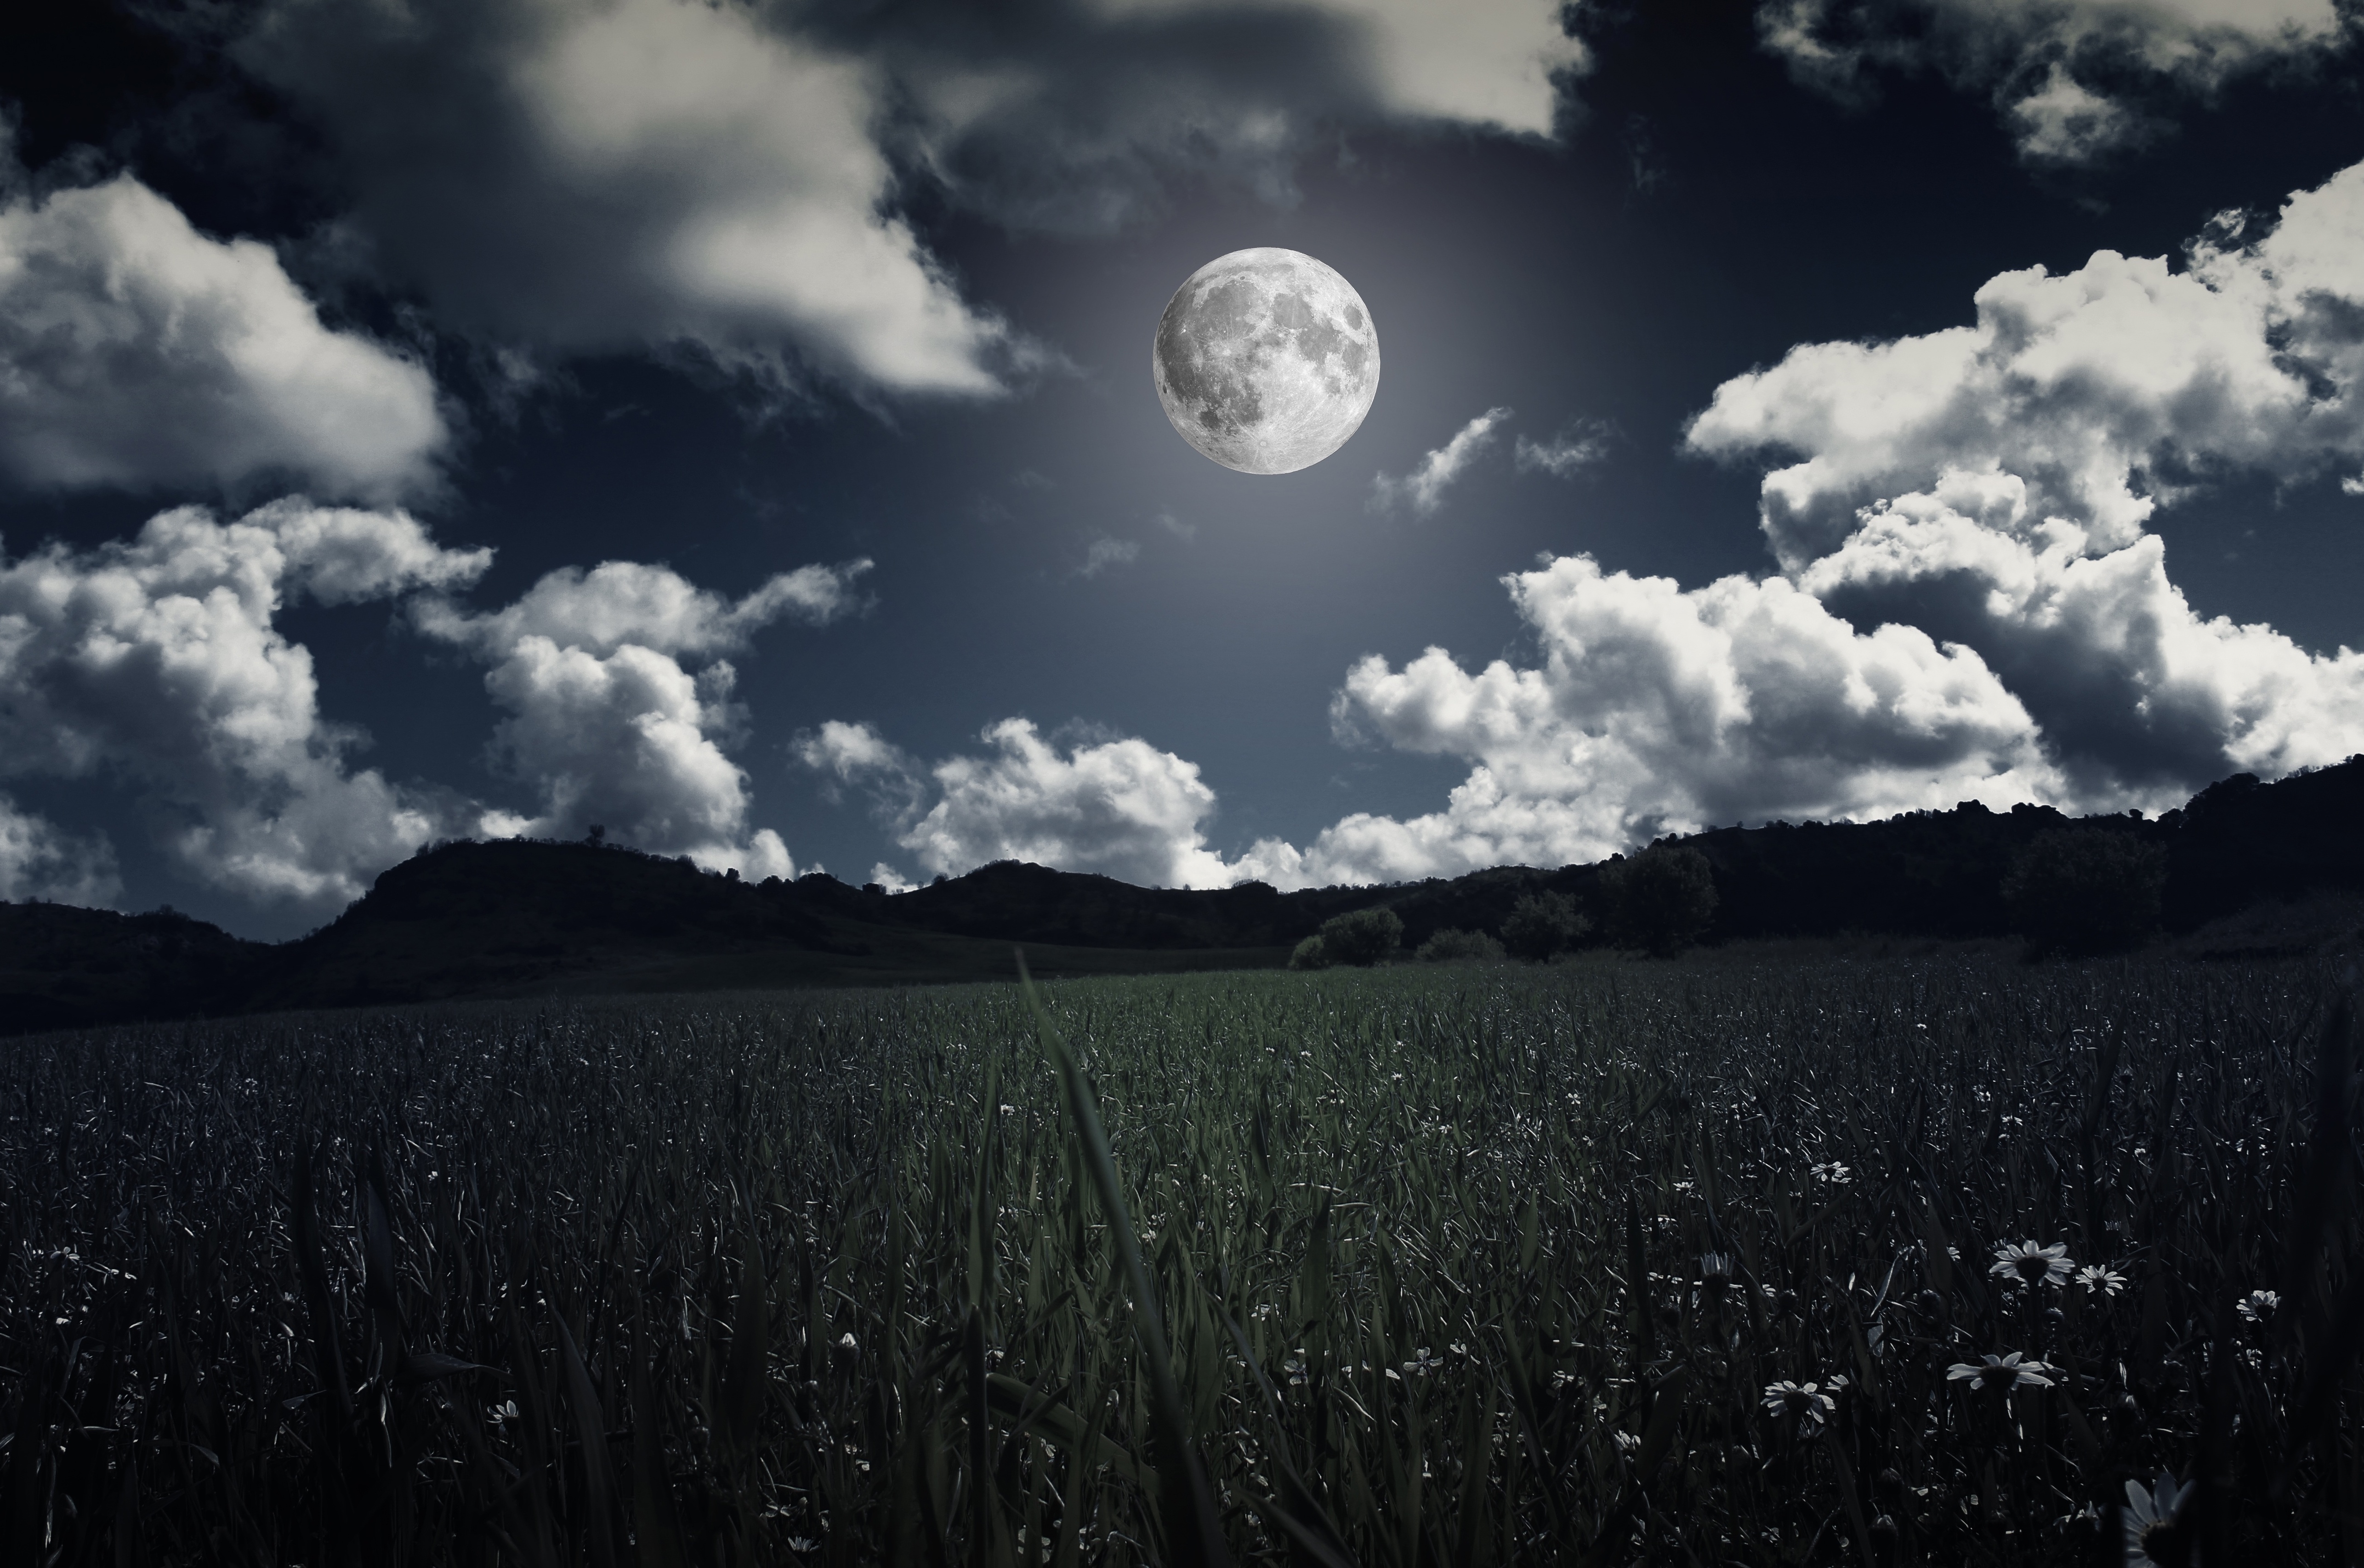 moon, full moon, grass, nature, clouds, field, photoshop 32K